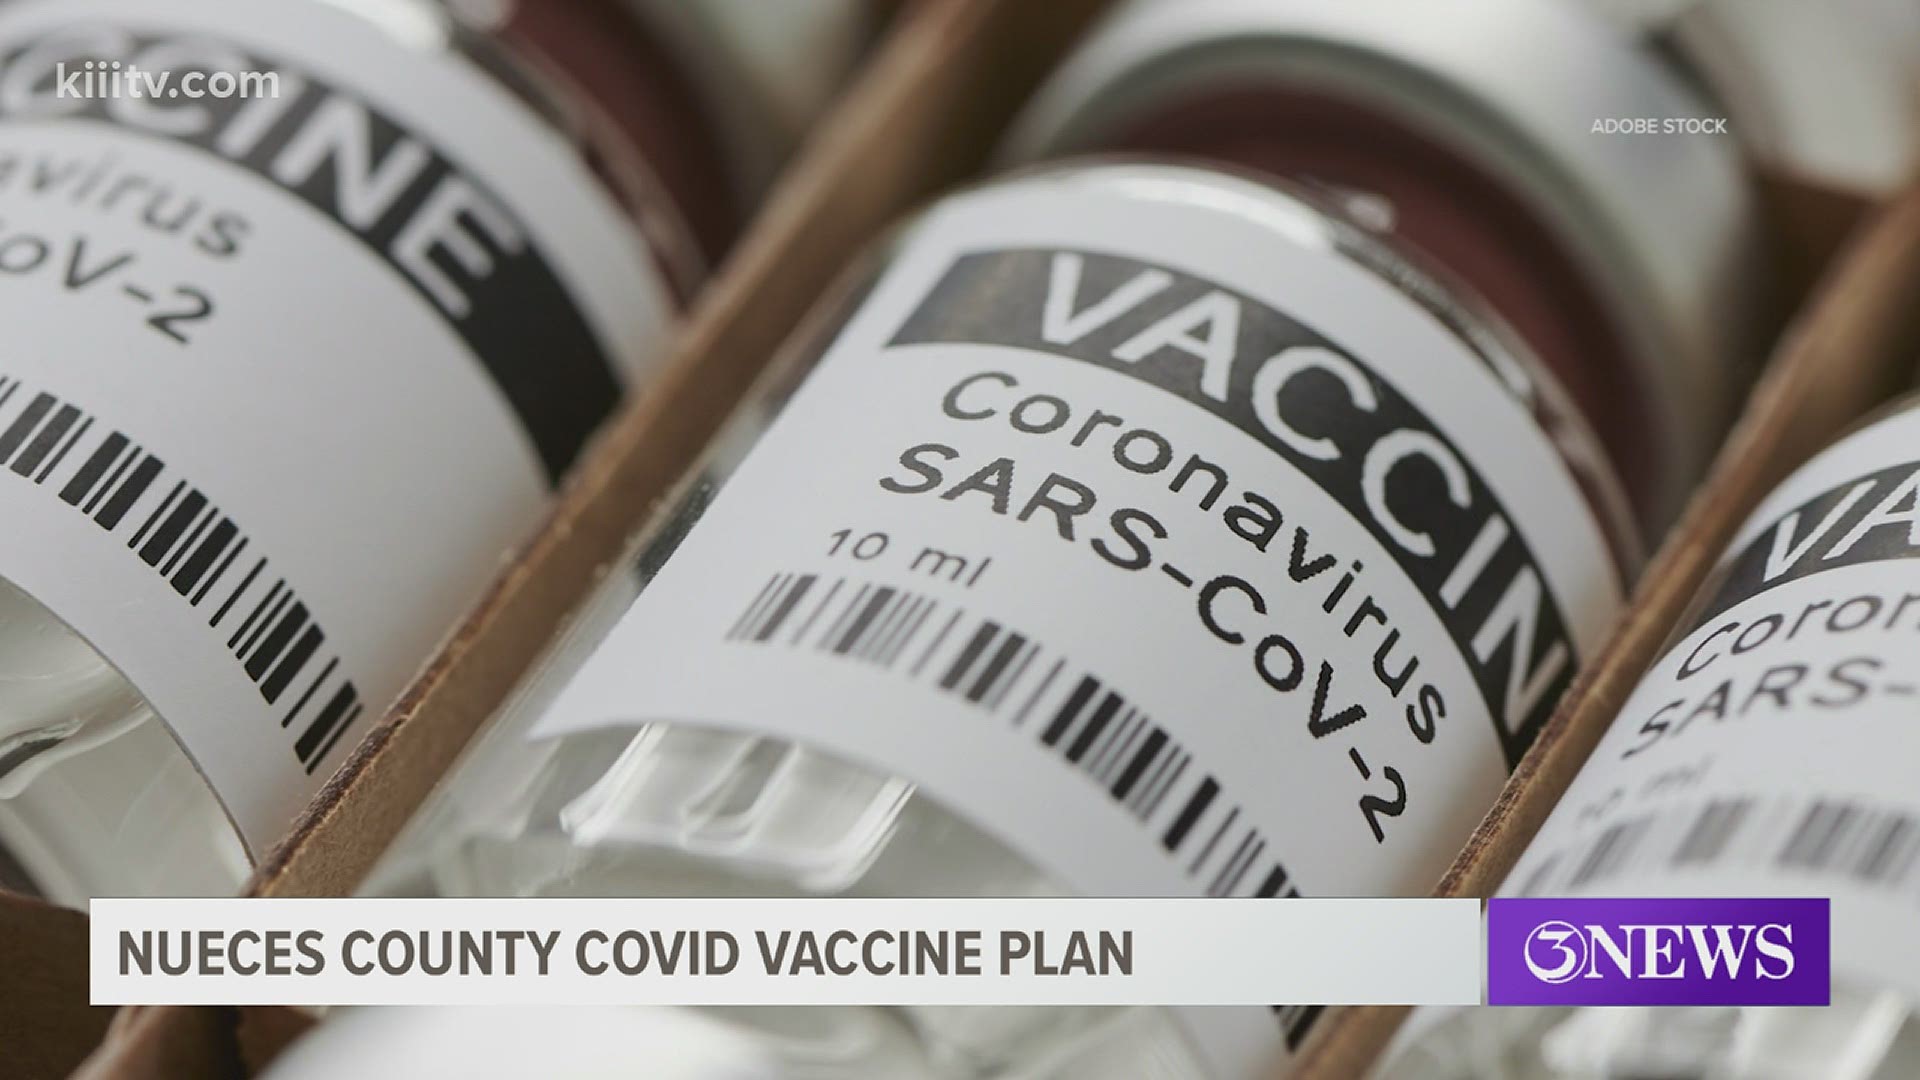 Health leaders in the Coastal Bend say they have a plan to distribute a COVID-19 vaccine based on their experience dealing with the outbreak of H1-N1.